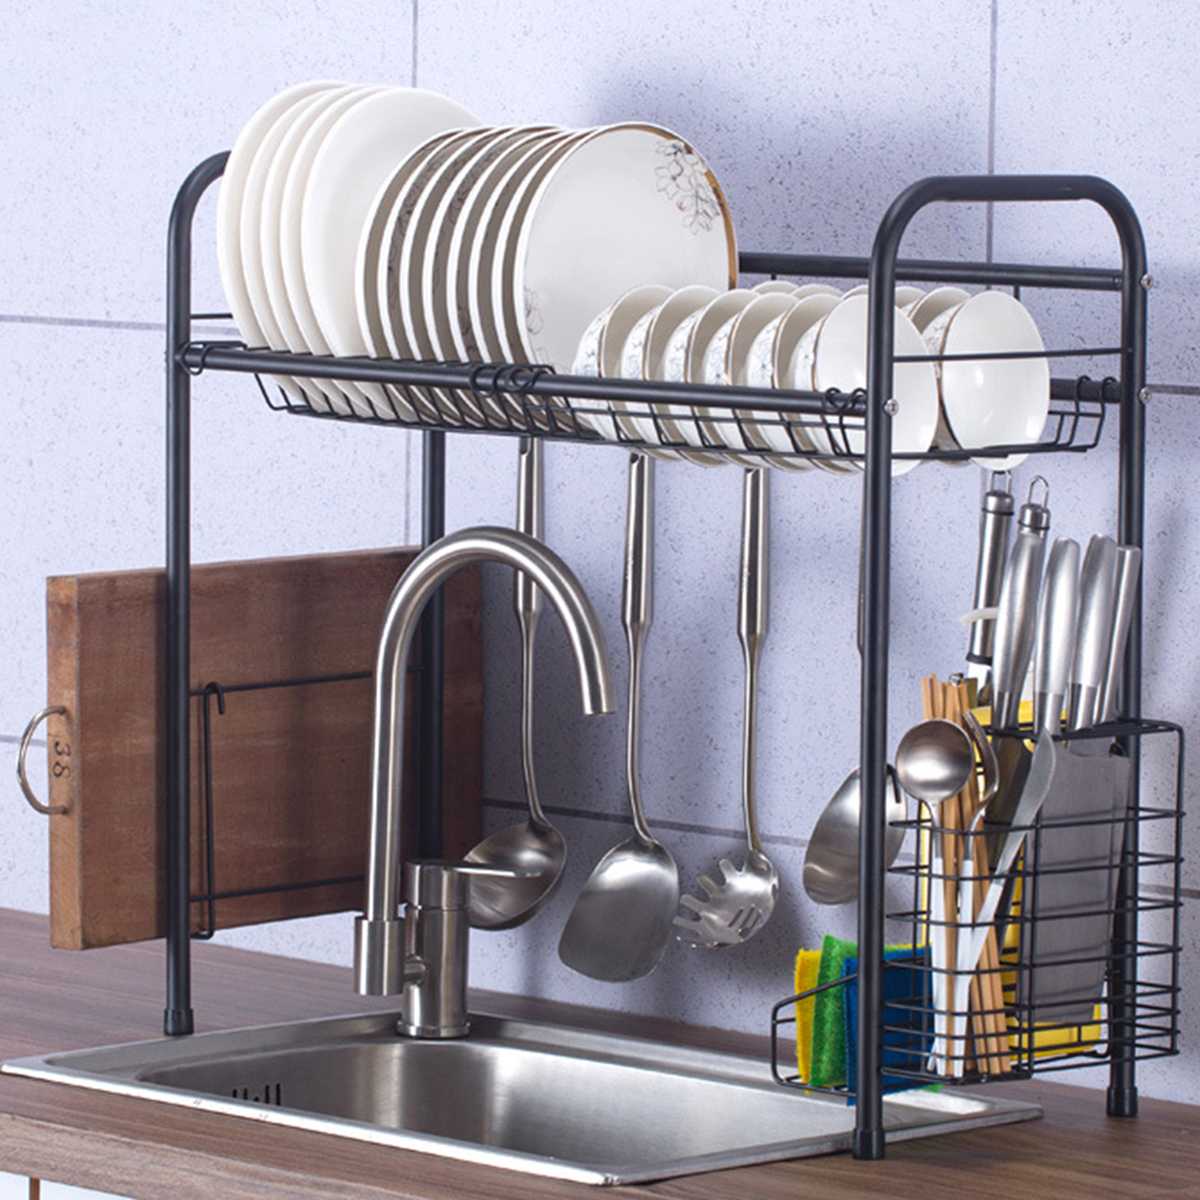 Stainless Steel Dish Drying Rack Kitchen Storage Shelf Over the Sink Counter-top Space Saver Stand Tableware Drainer Organizer